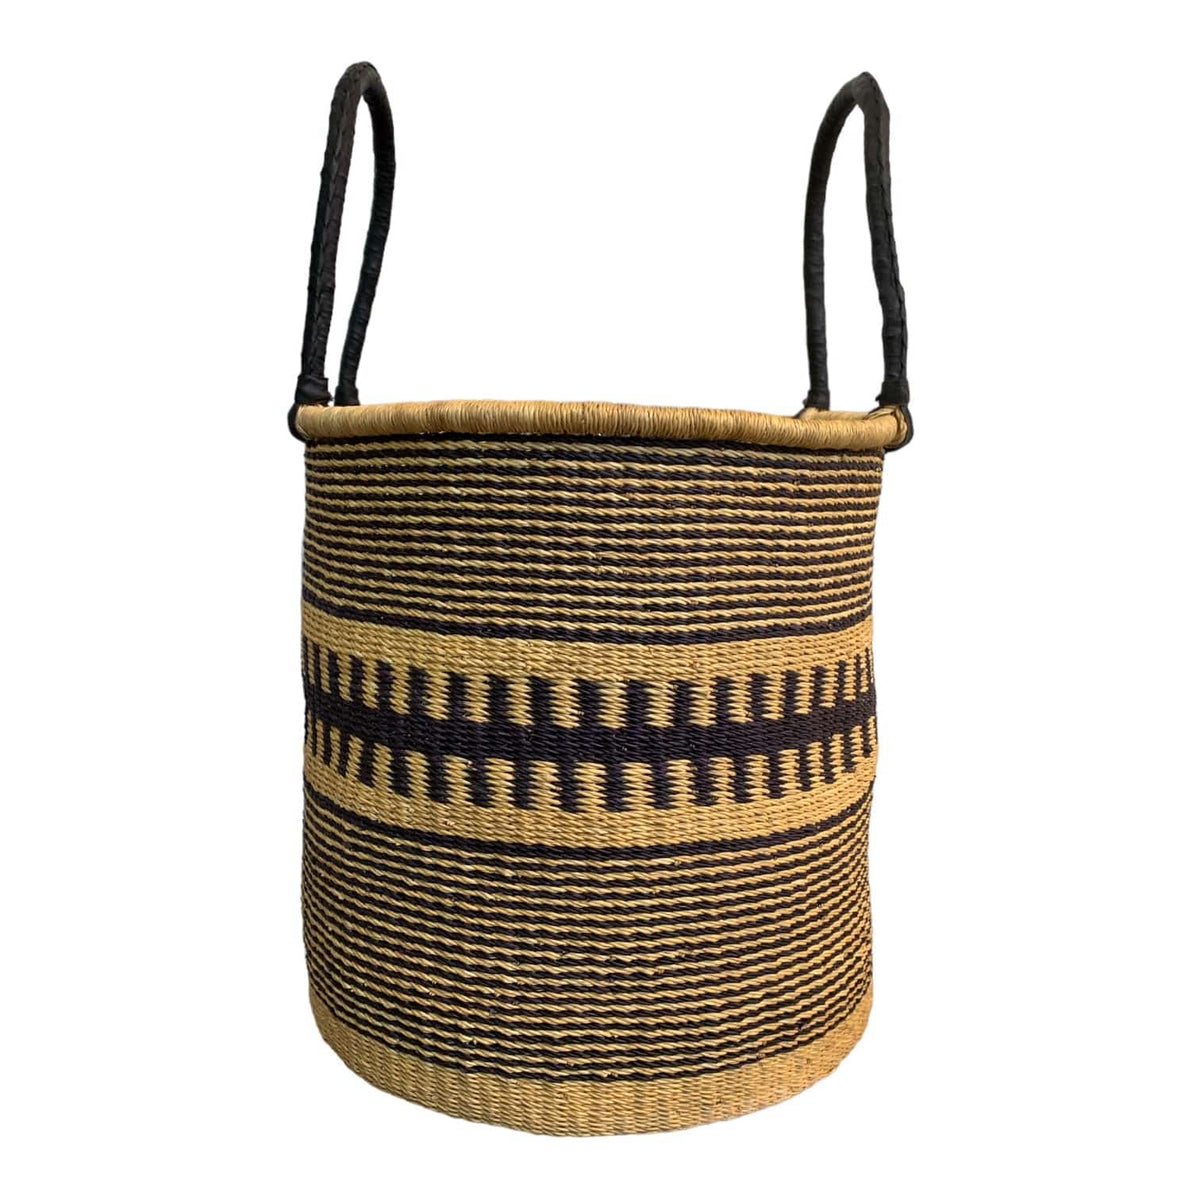    Woven-Licorice-Large-Basket-Little-and-Fox